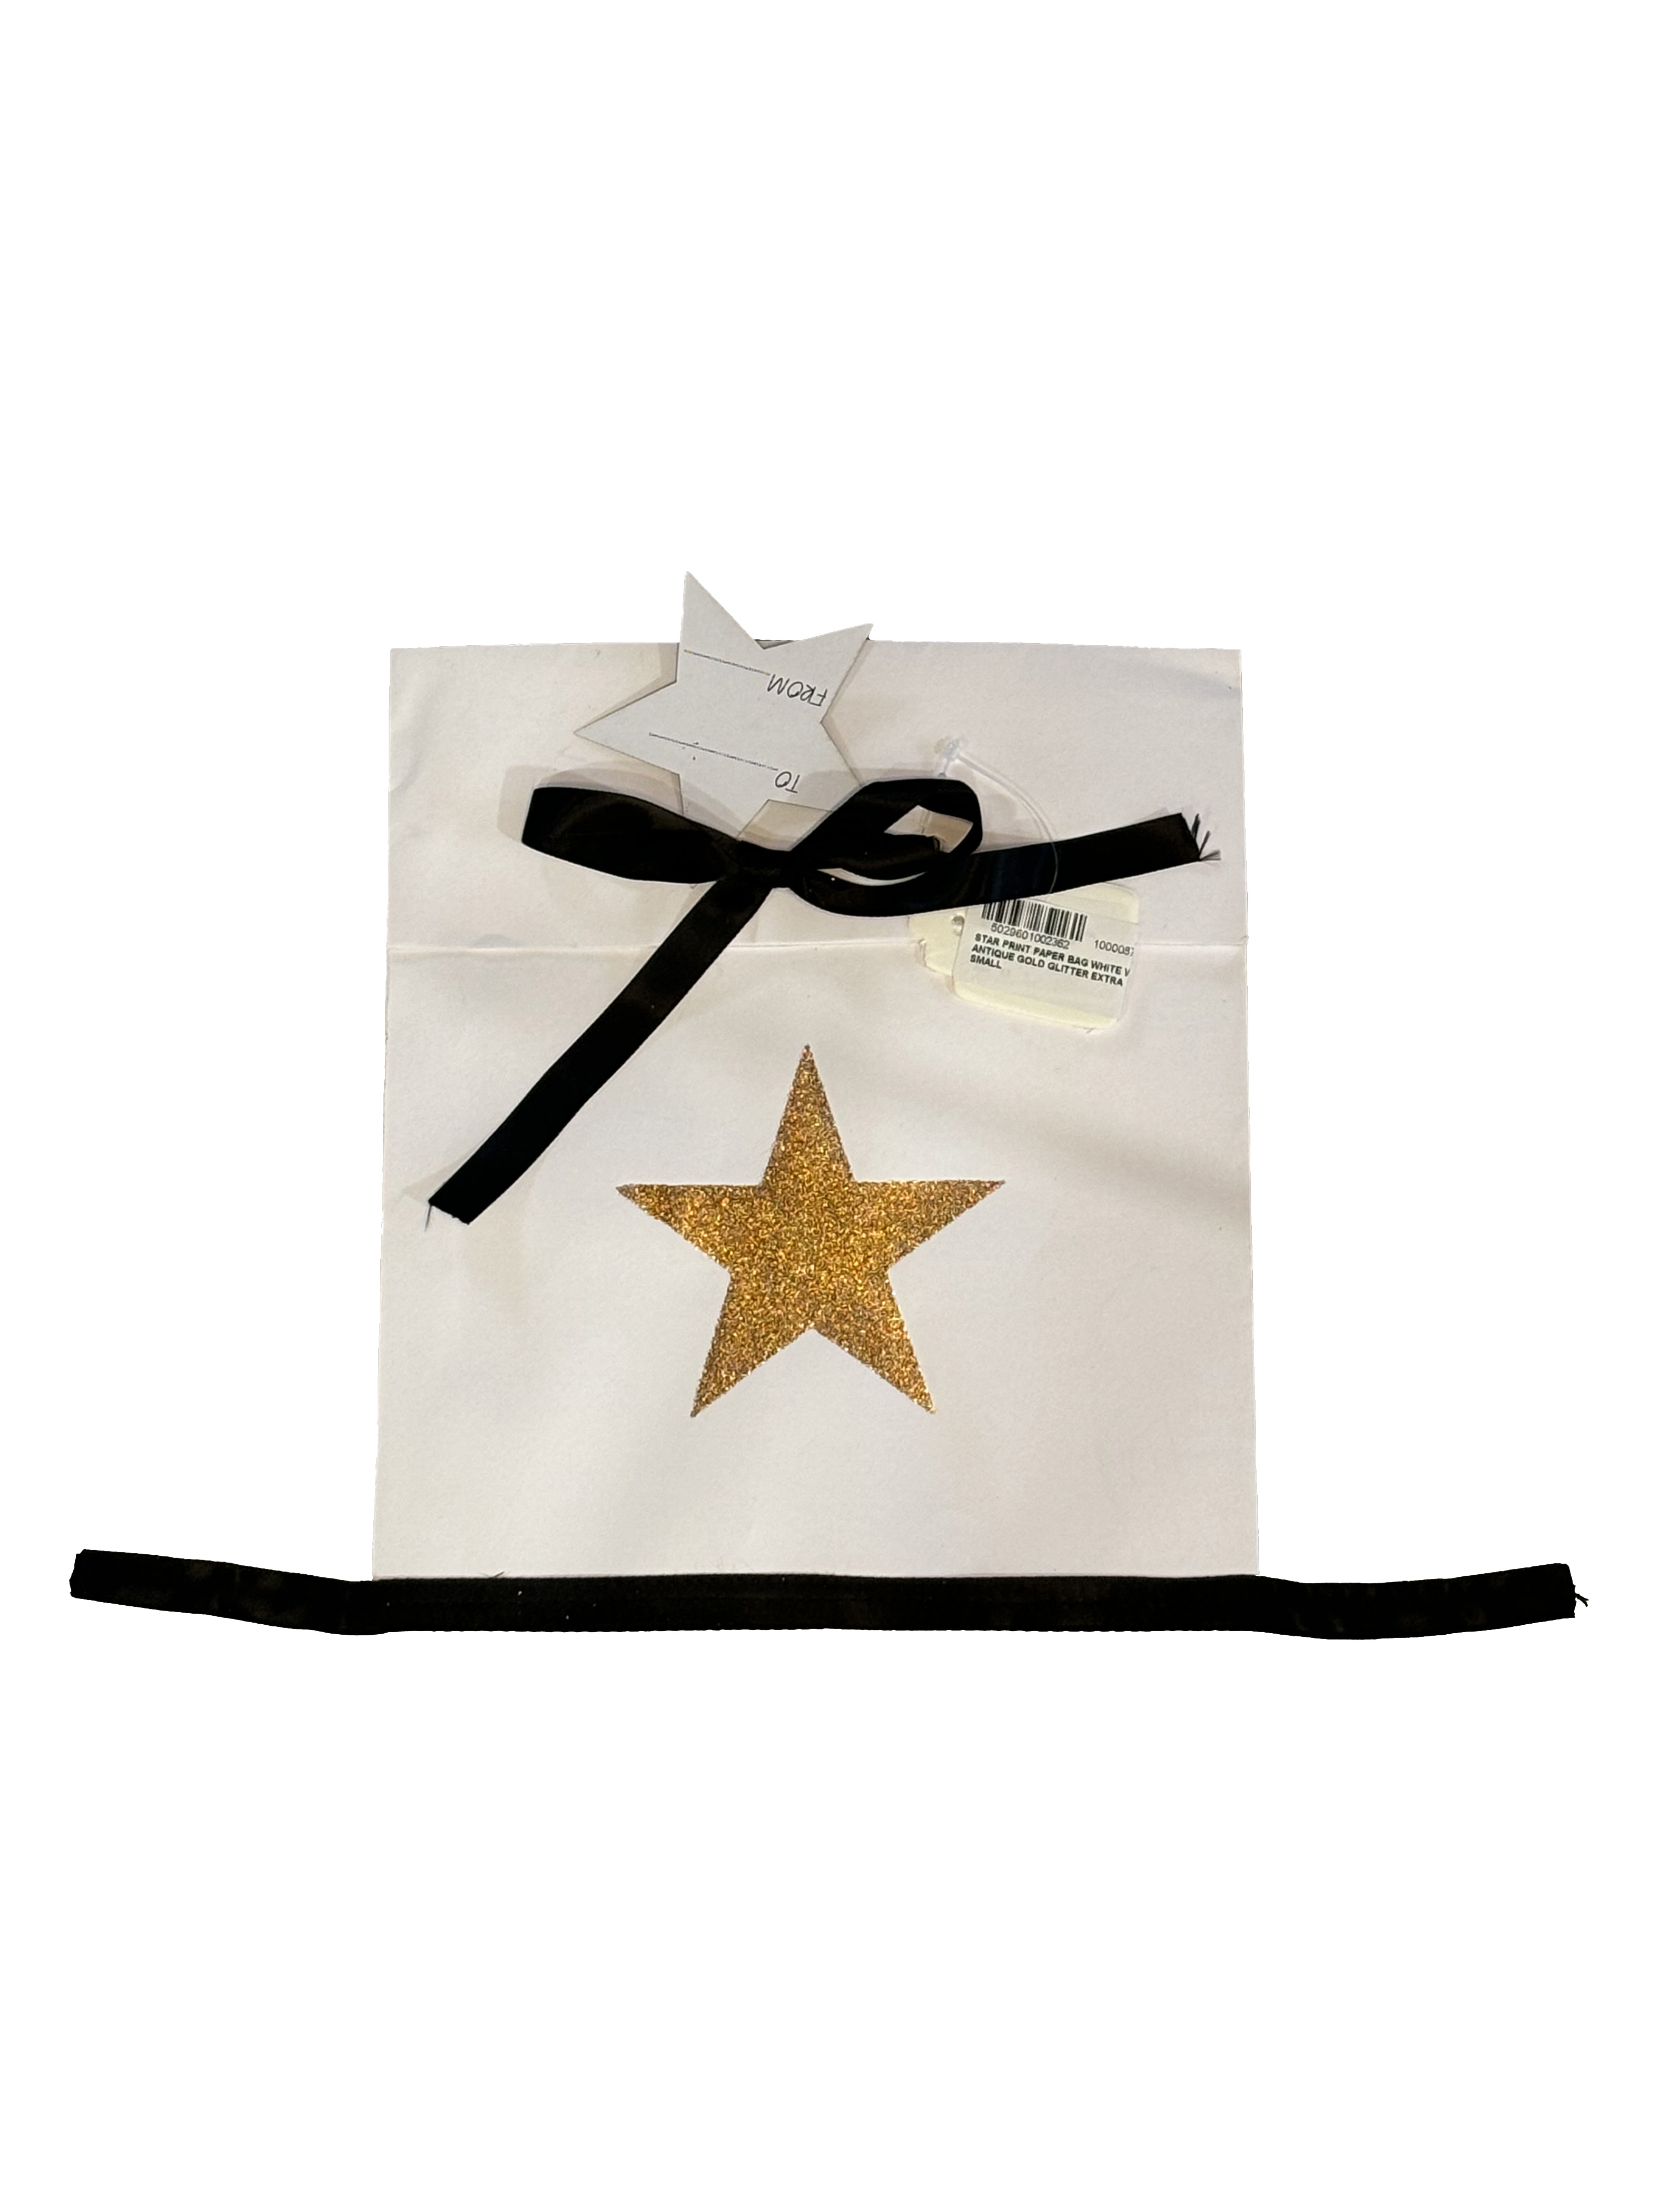 Star Print Paper Bag White With Antique Gold Glitter Extra Small Gift